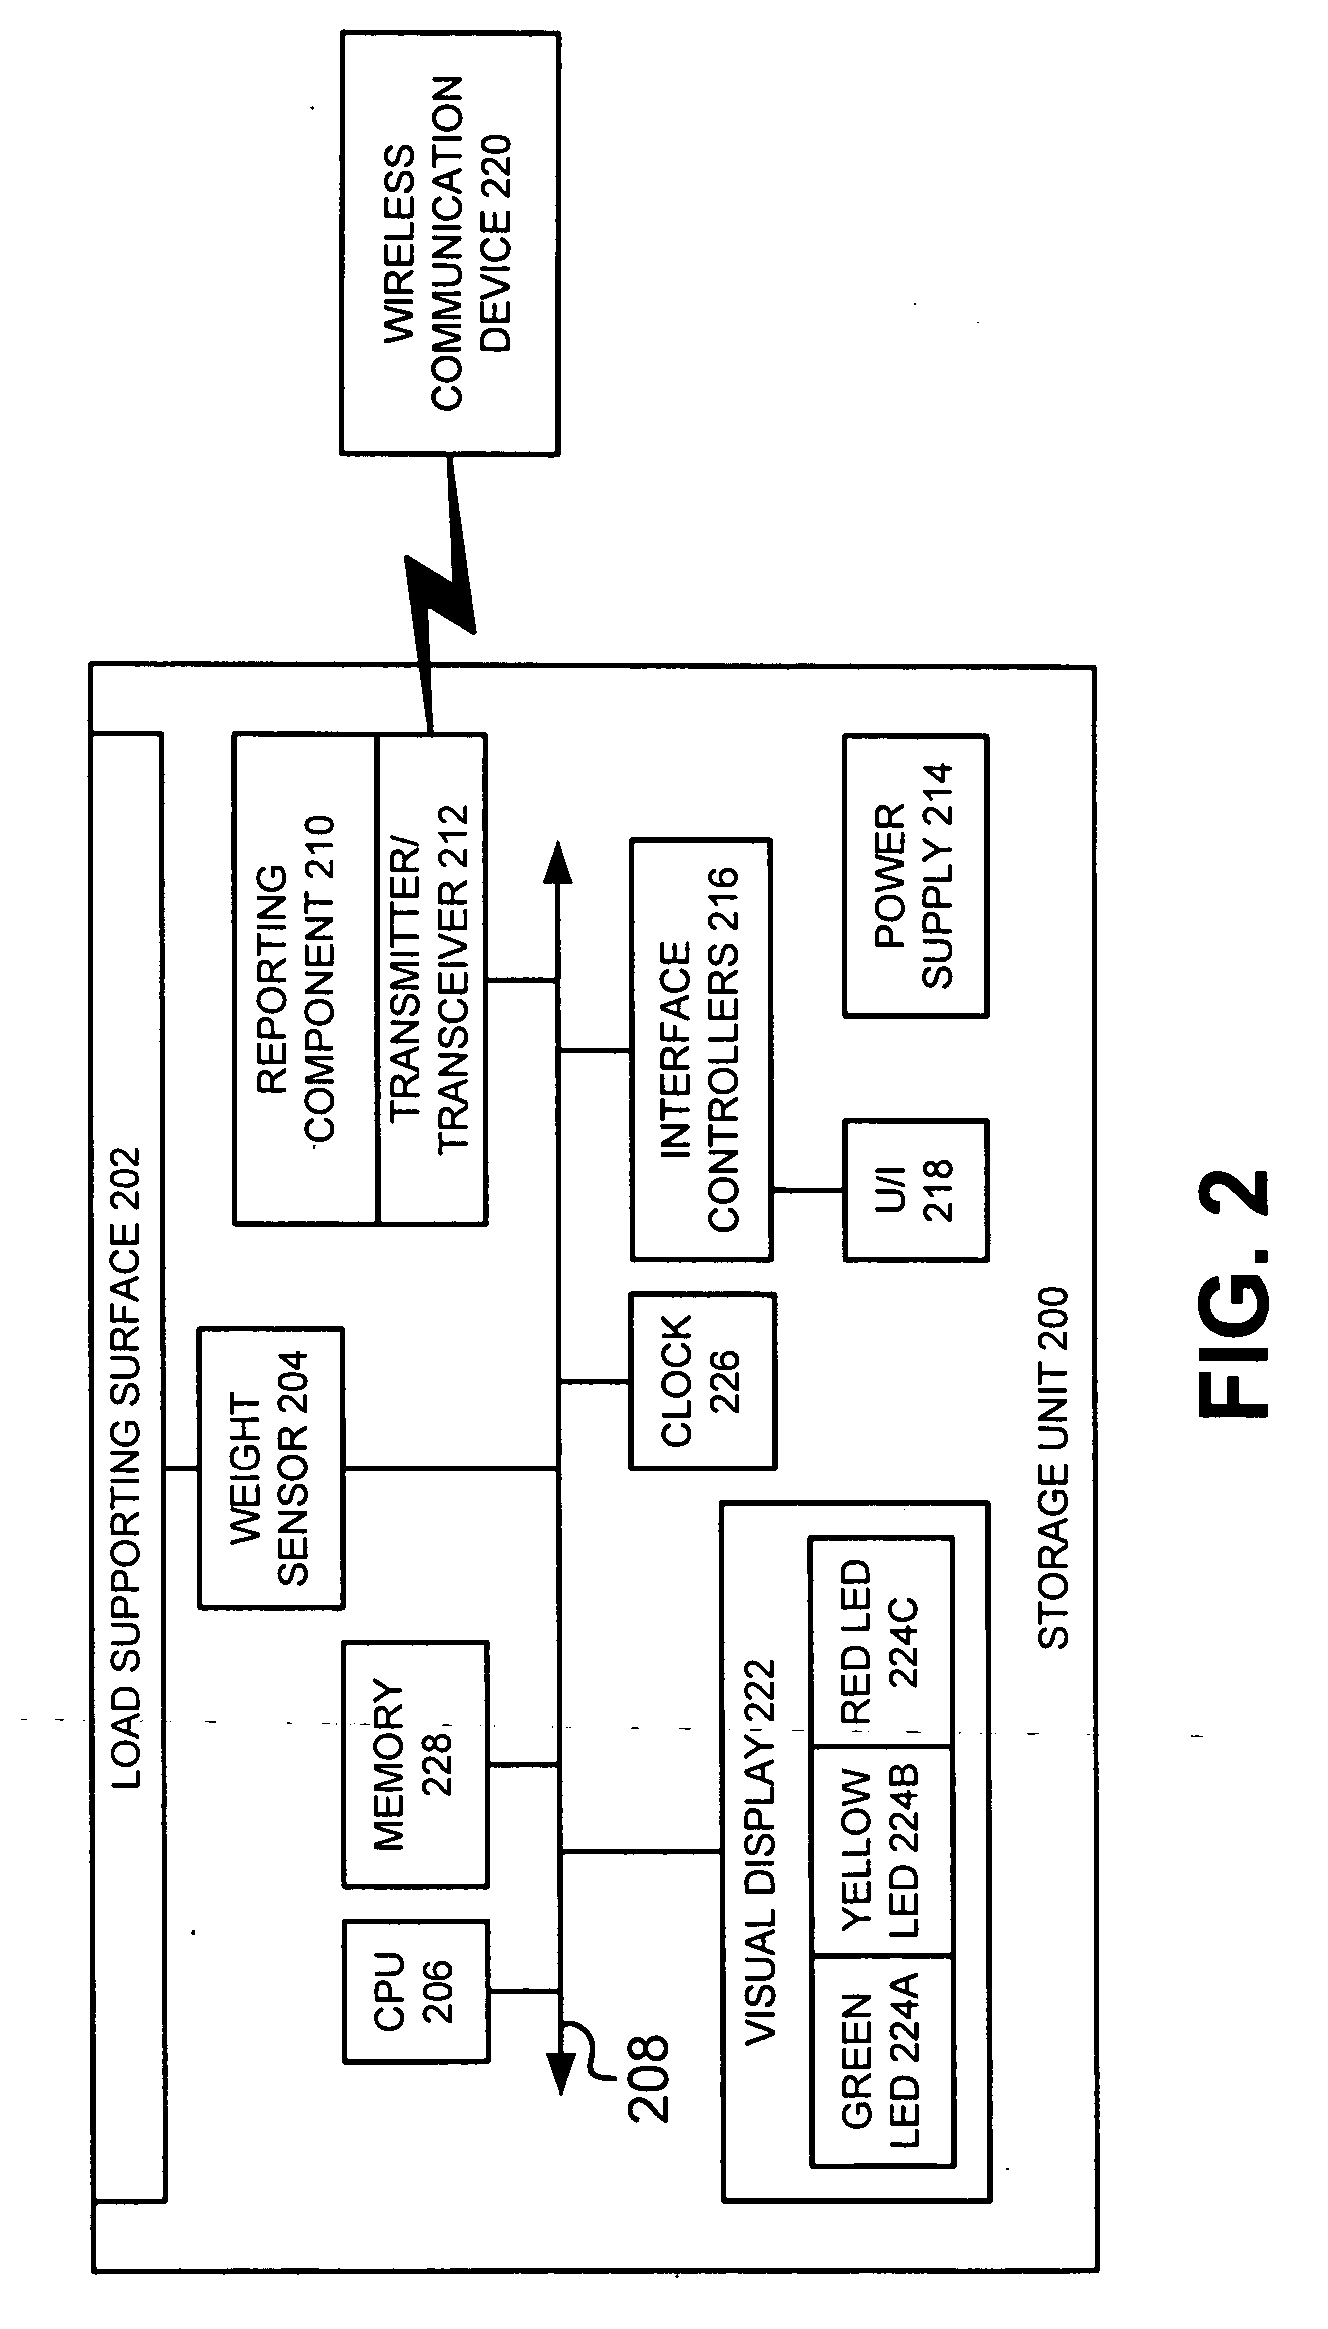 System, method, and computer program product for monitoring inventory